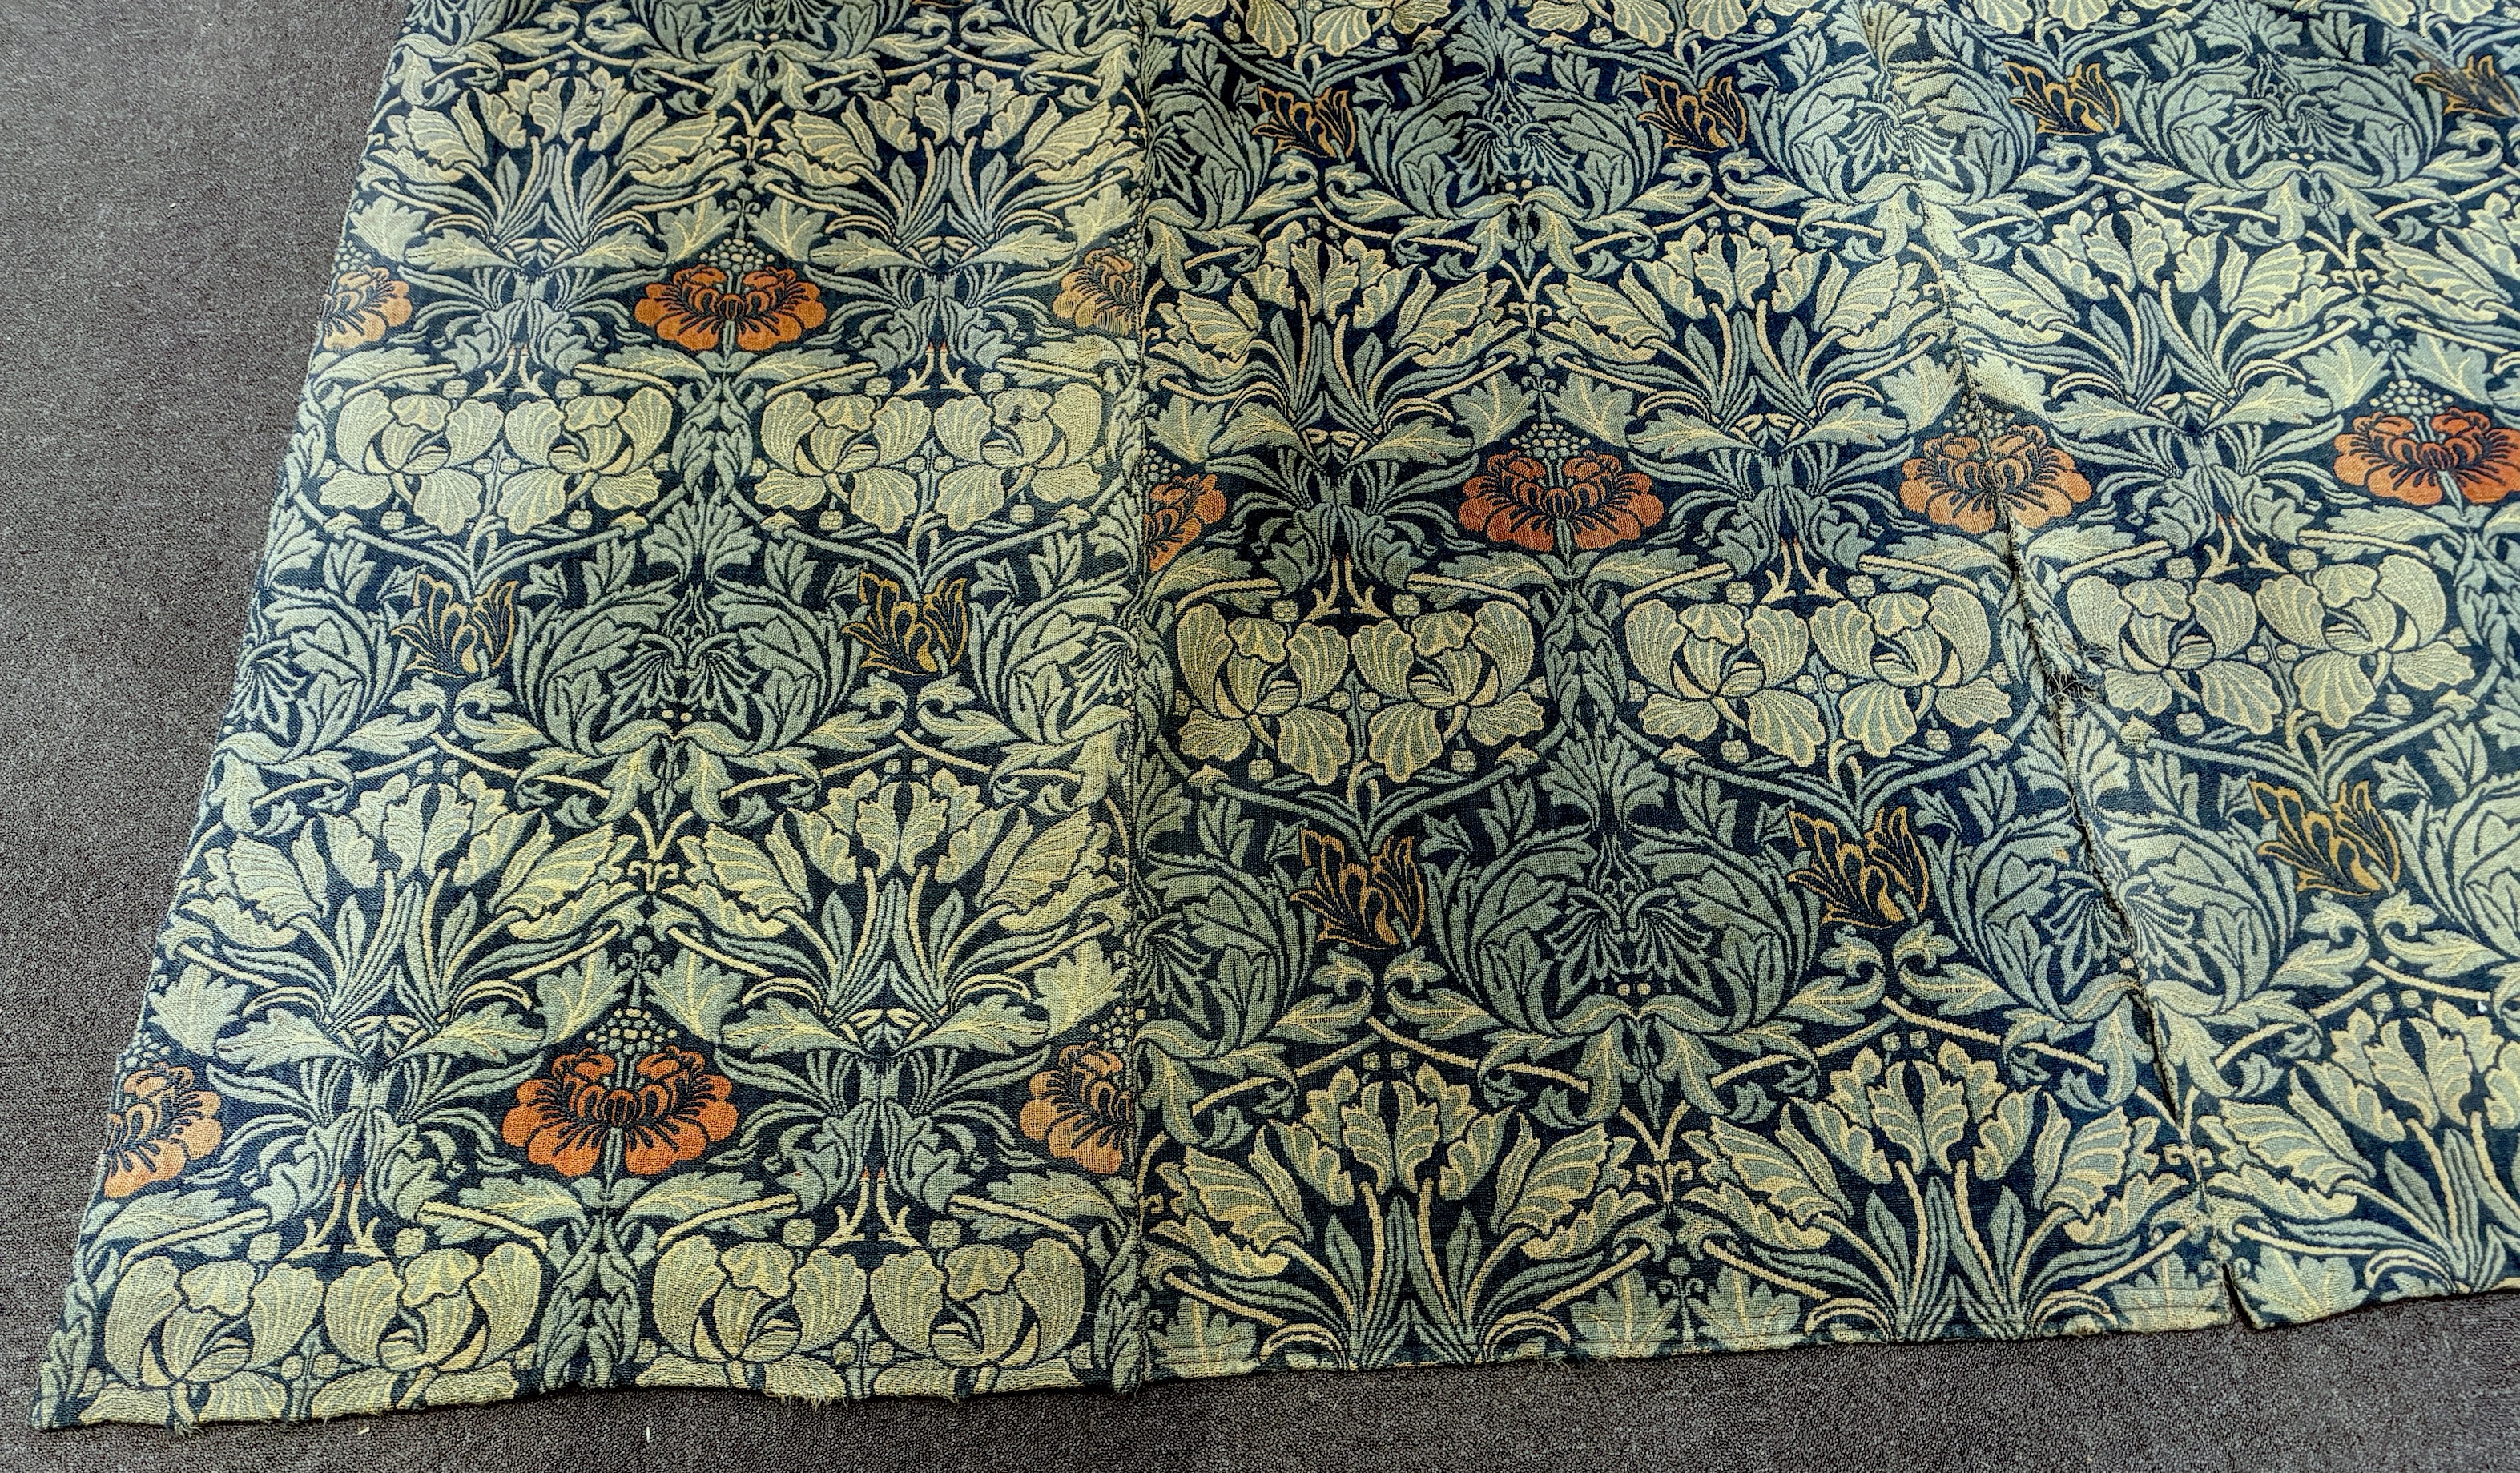 William Morris (1834-1896). Four panels of ‘Tulip and Rose’ triple woven wool and linen mix being two lengths sewn together creating a pair of wider curtains widest curtain (of two panels) 189cm wide x 158cm long, Single